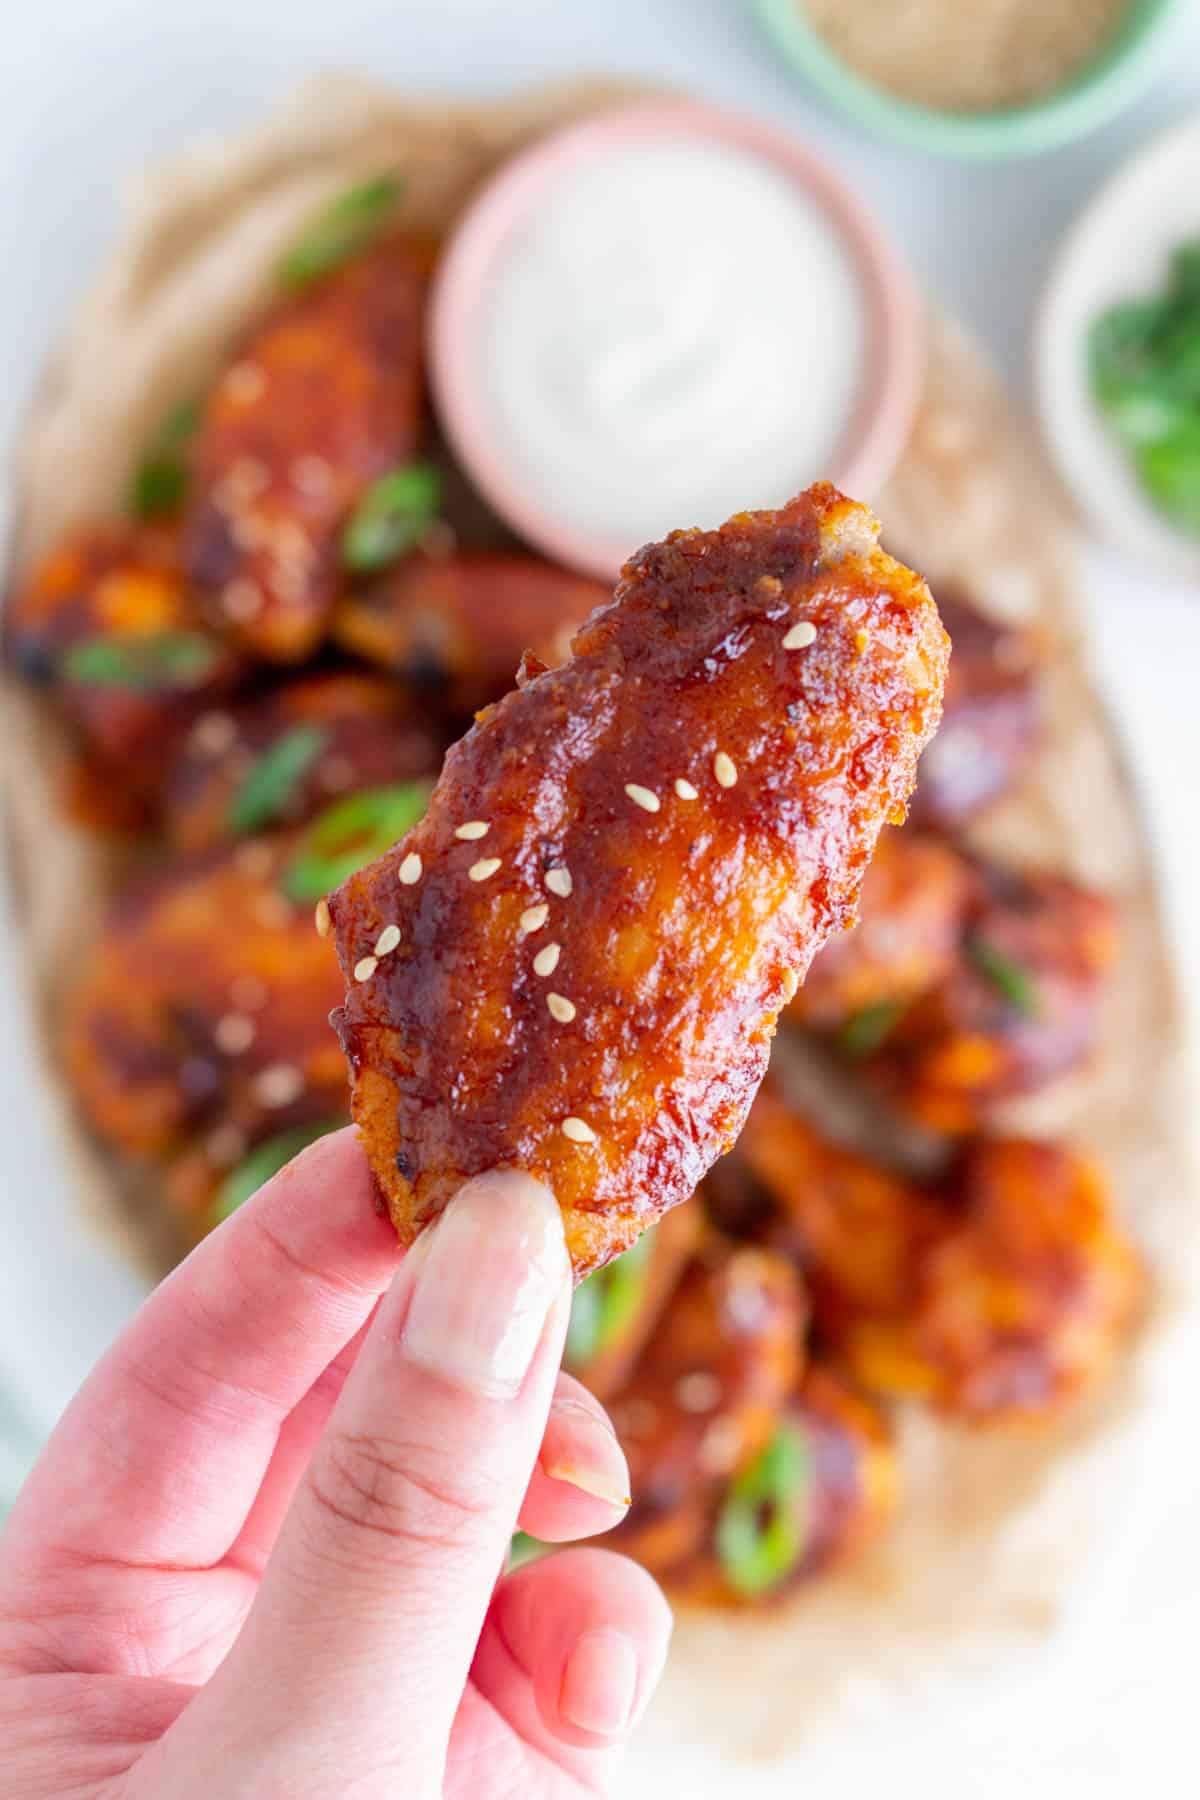 A hand holding up a crispy bbq chicken wing with some sesame seeds.